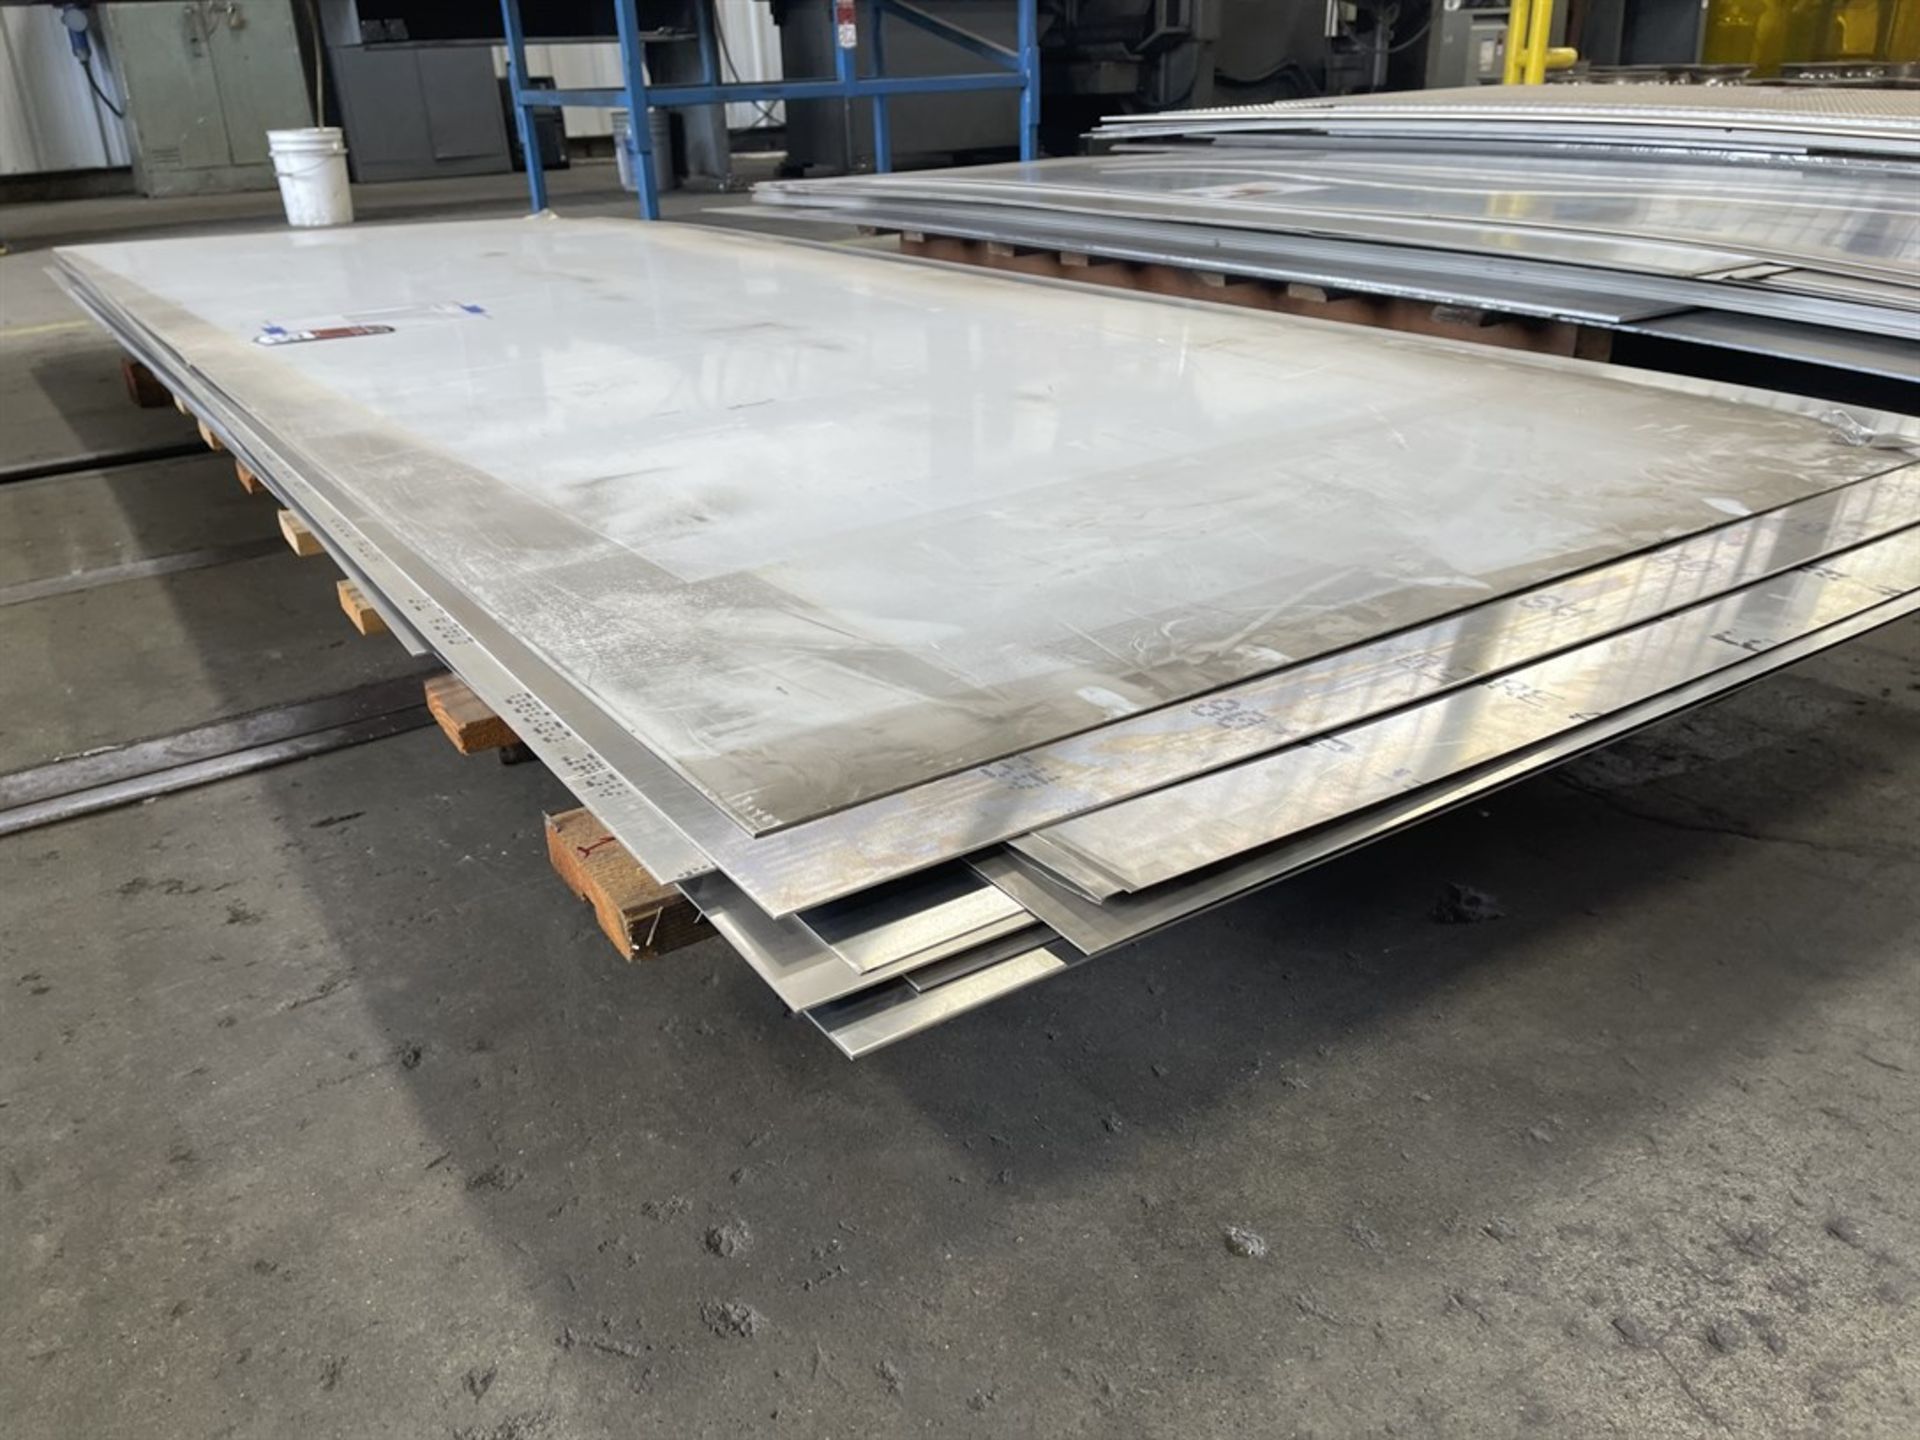 Lot of Assorted Aluminum Sheet Stock Including 5052, 6061 and 7075 - Image 4 of 5